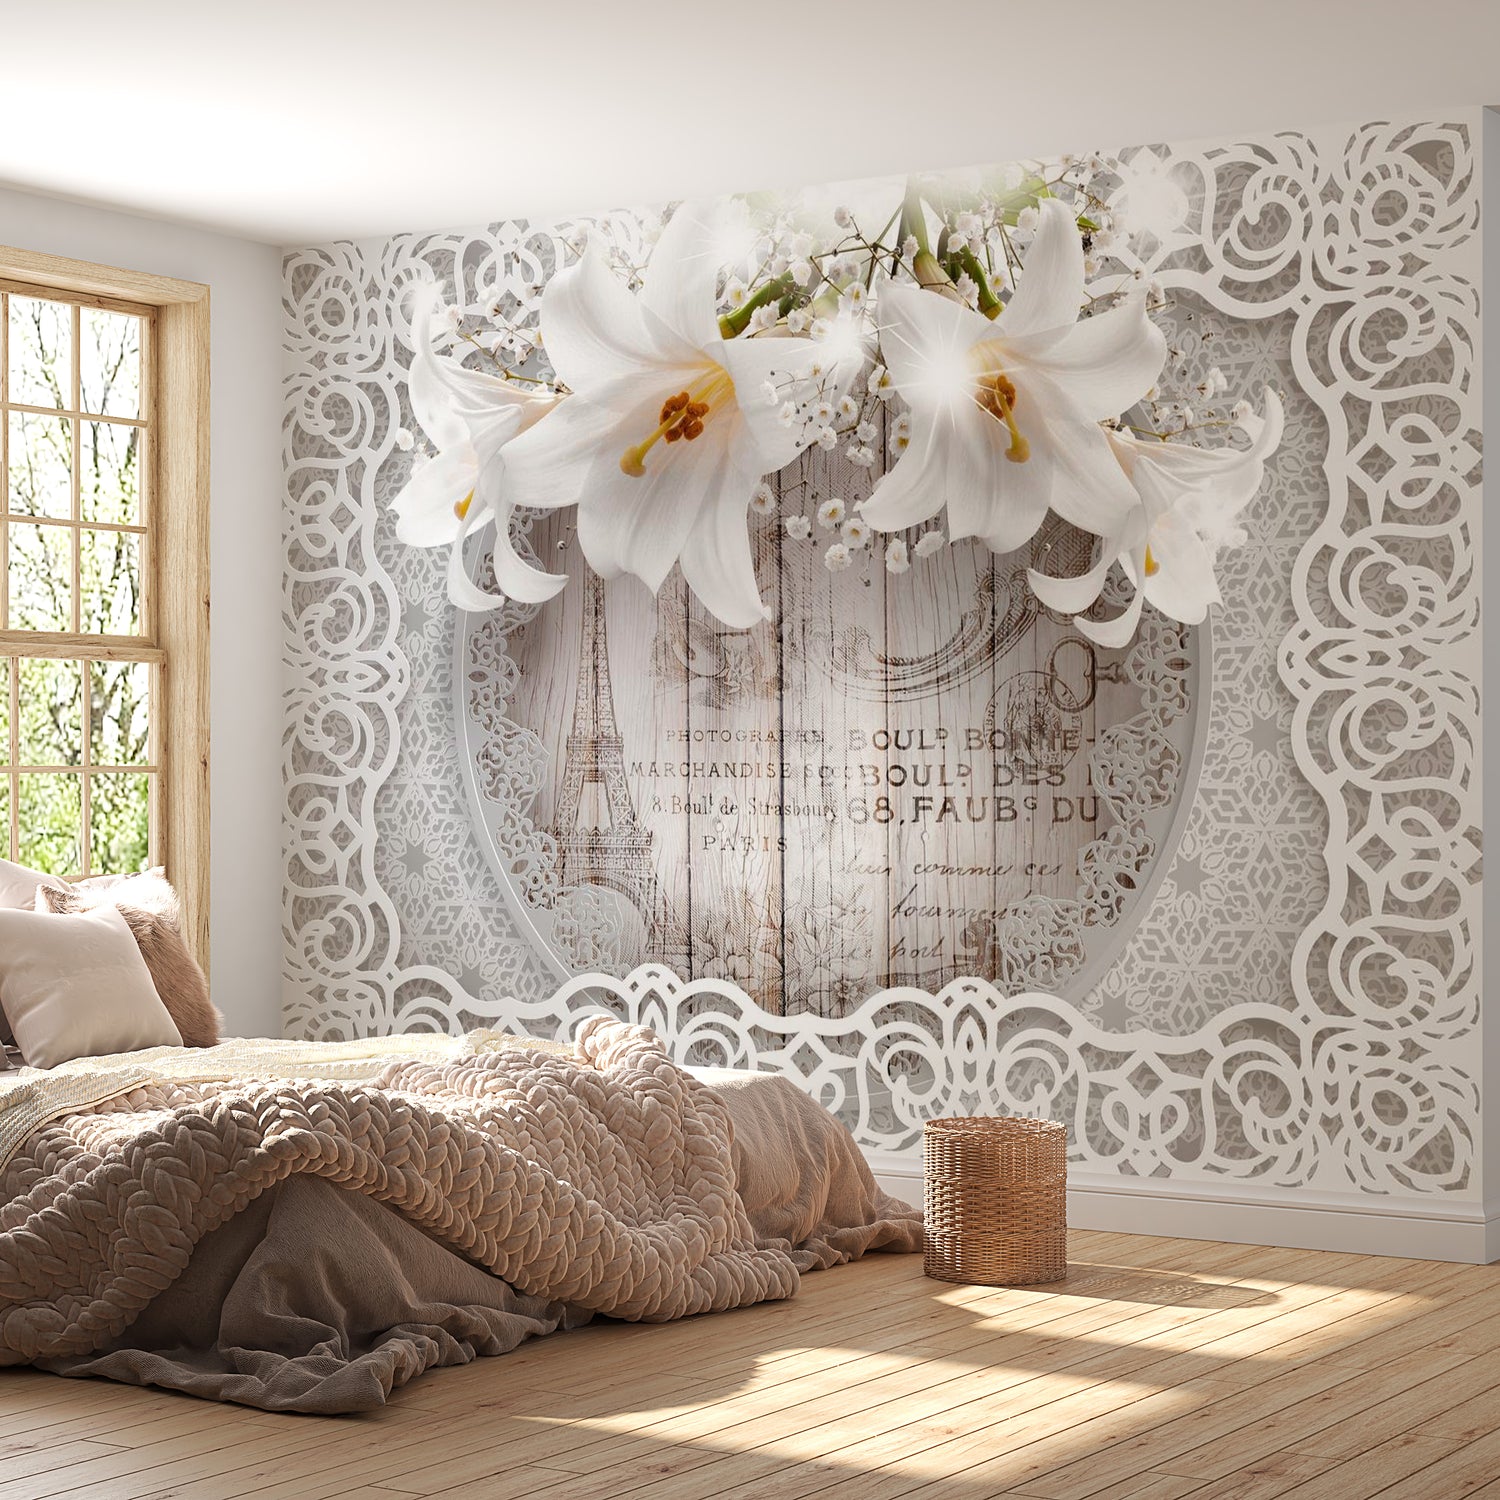 Peel & Stick Floral Wall Mural - Lilies And Wooden Background - Removable Wall Decals